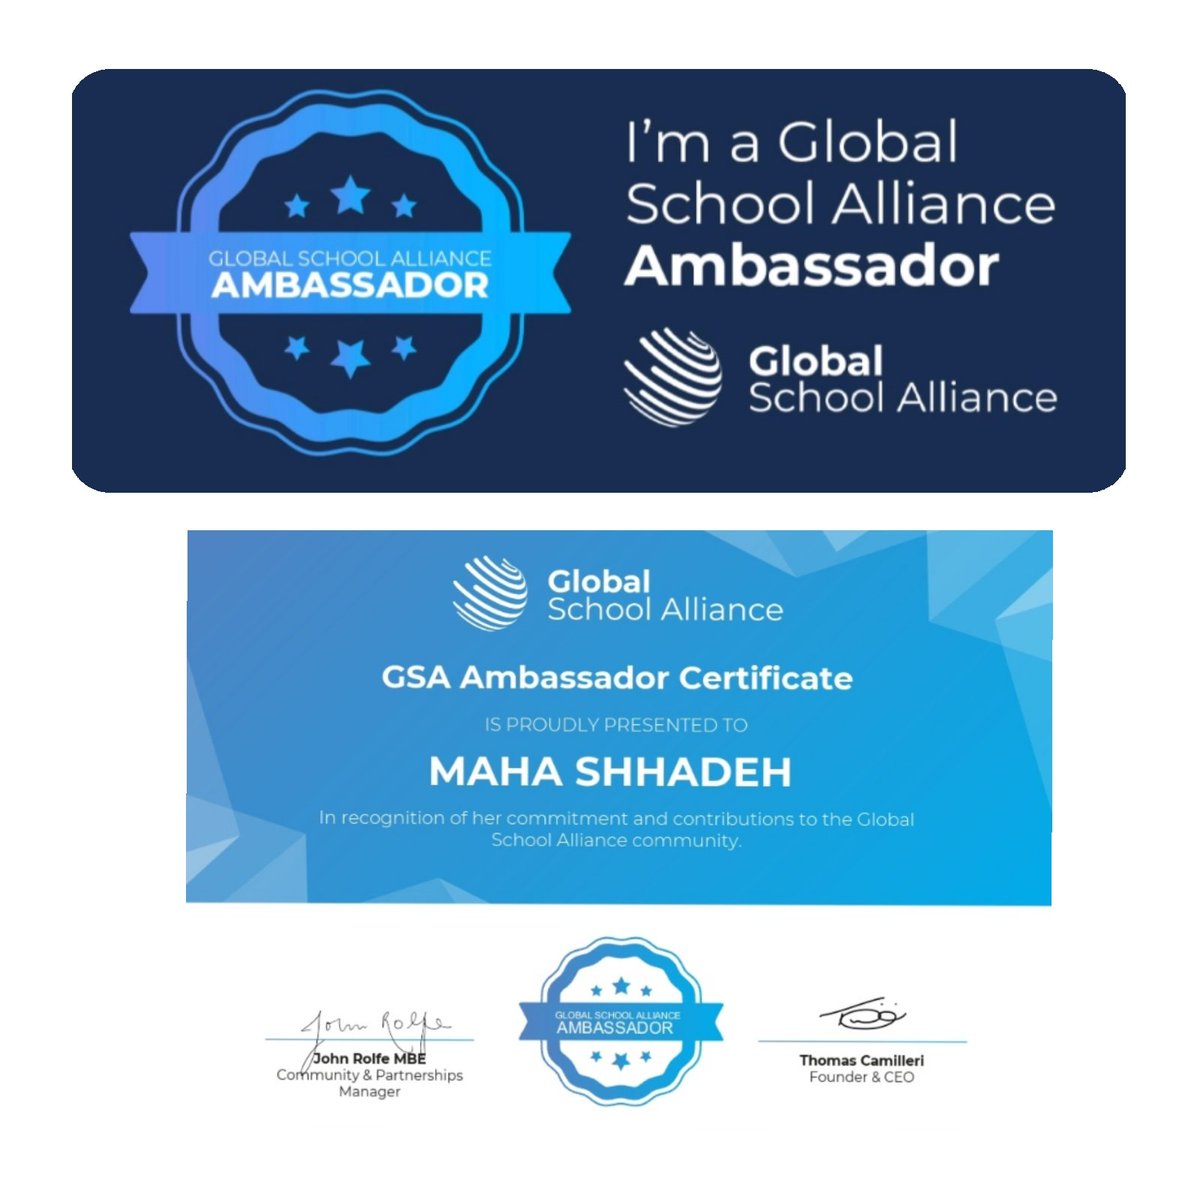 I am absolutely thrilled to share that I have taken on an incredible new role as a @GSchoolAlliance Ambassador!
#EducationExcellence #GlobalAlliance #SchoolAmbassador #FutureofEducation #EmpoweringYouth #Uk #globalgoals #liverpool  #ConnectedByLearning